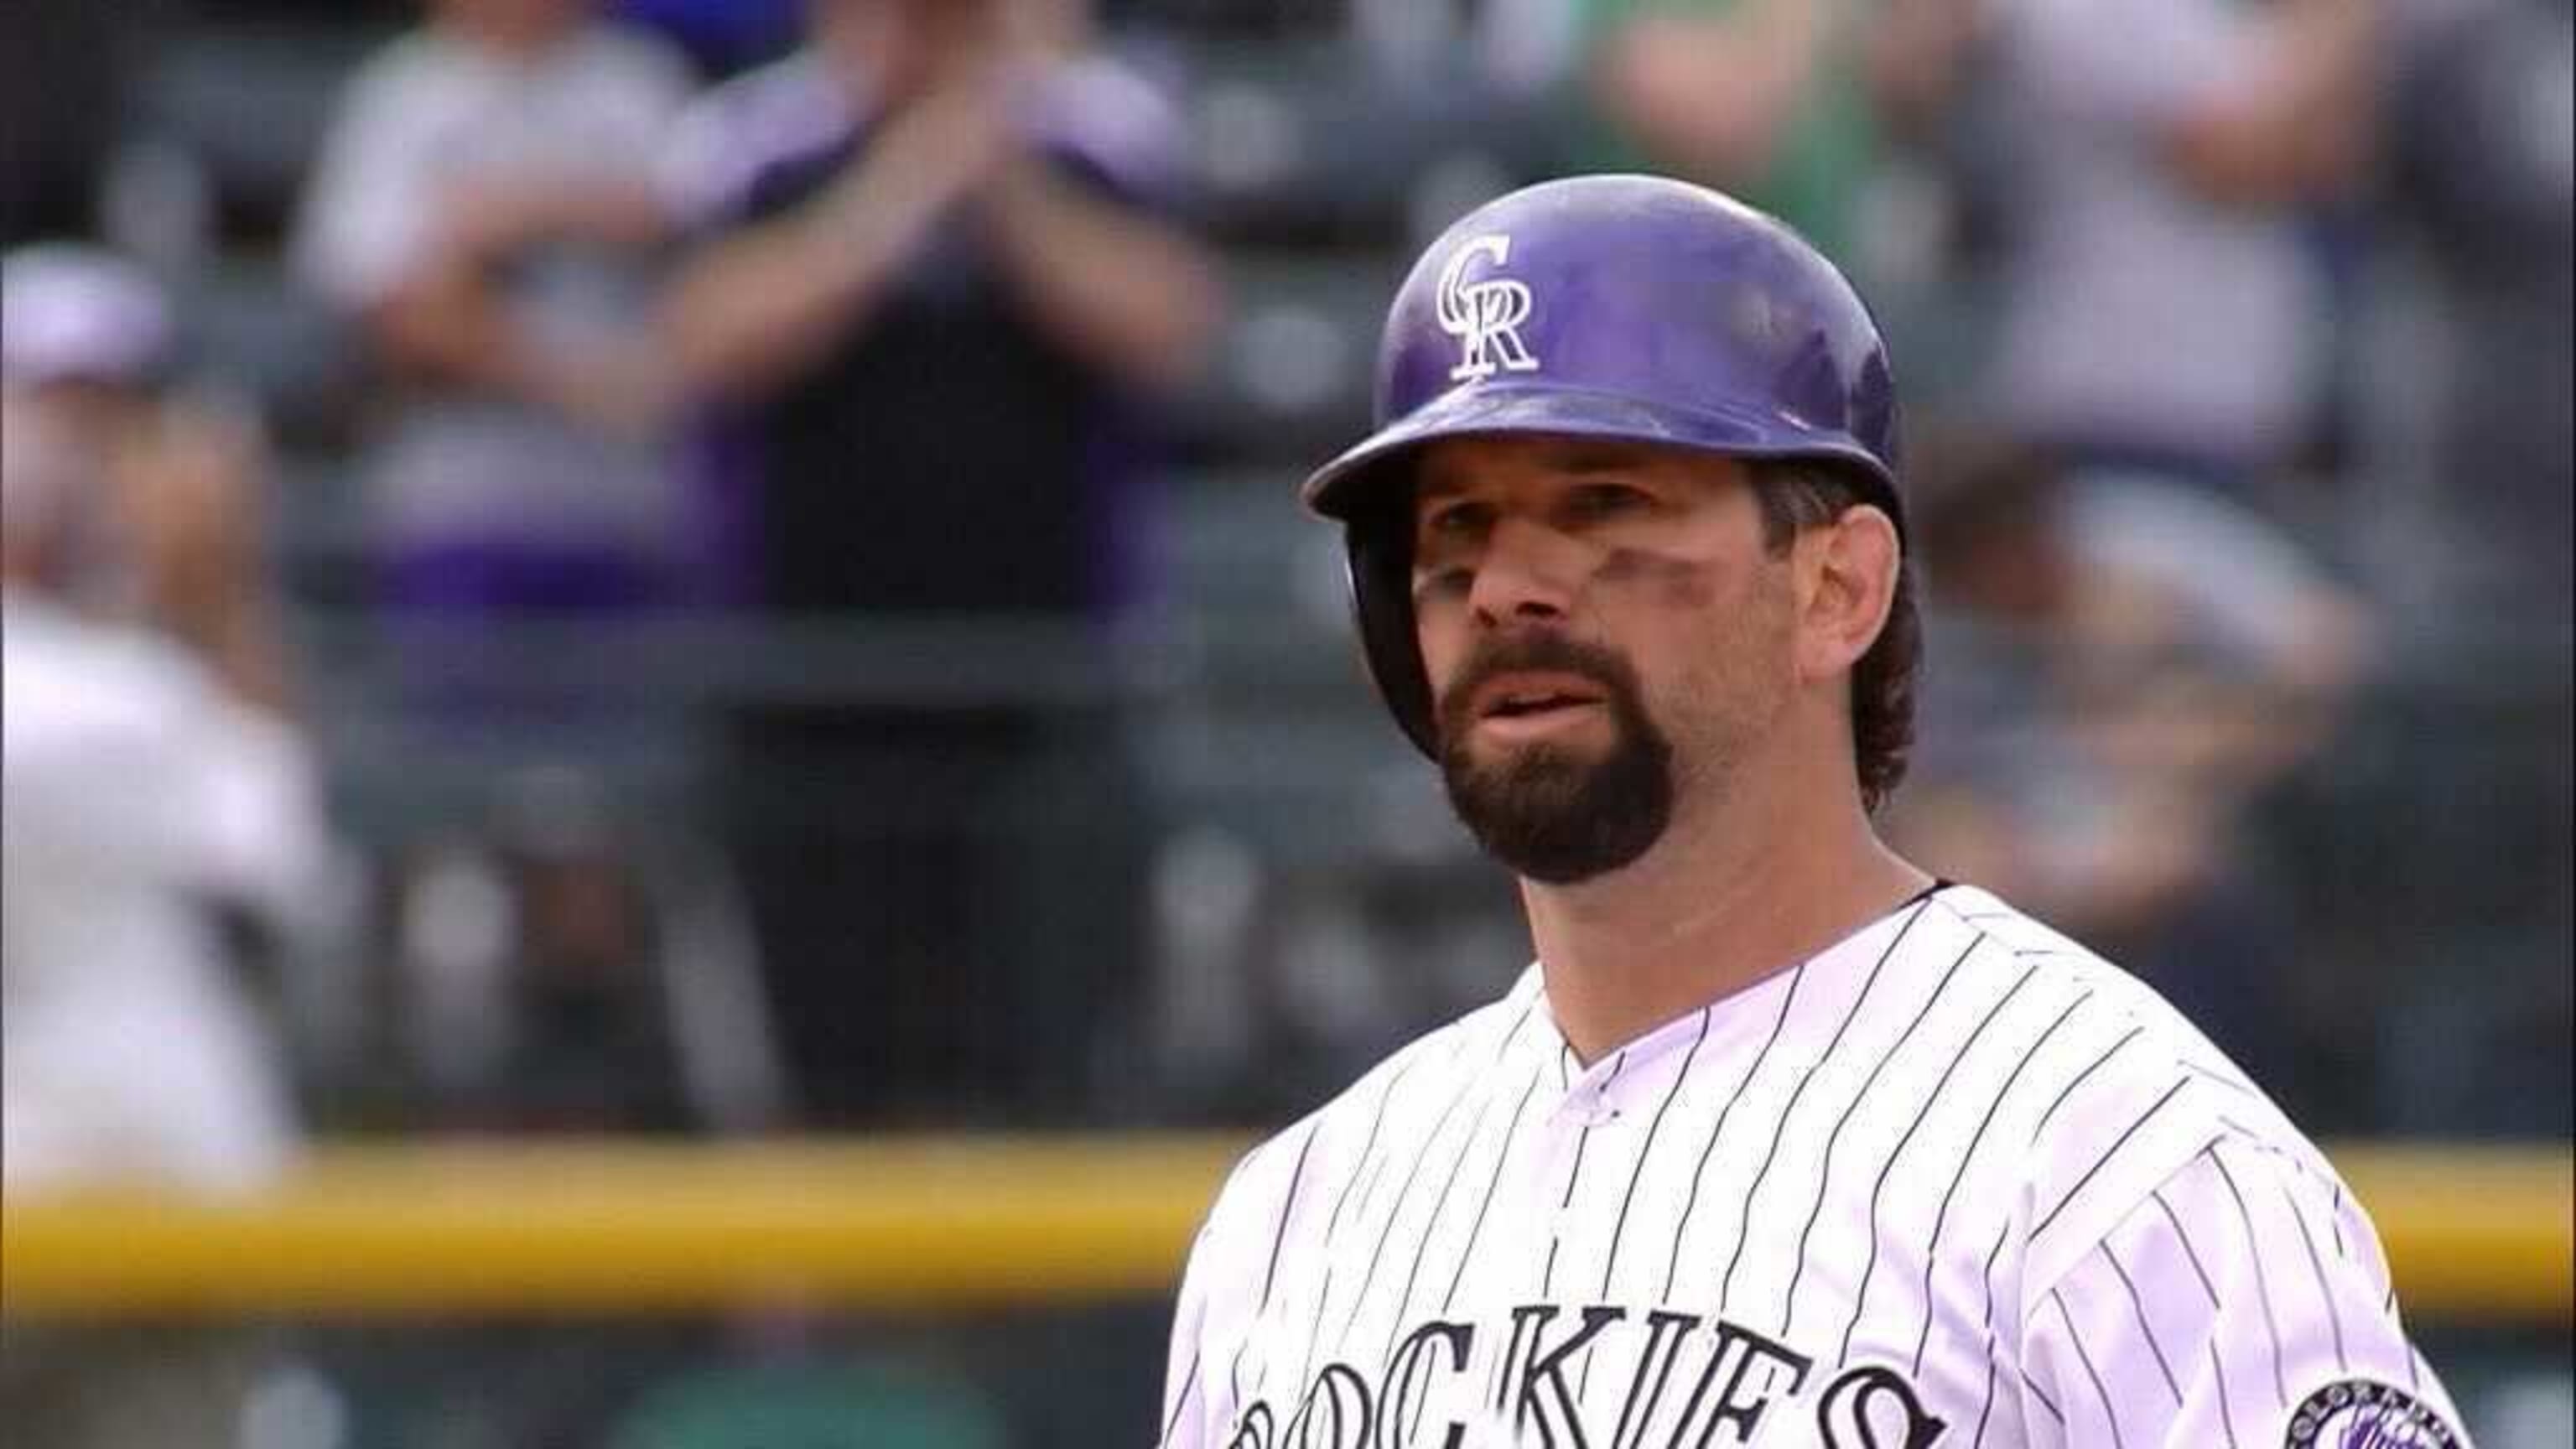 Lyons Share: This BBWAA member believes Todd Helton should be in